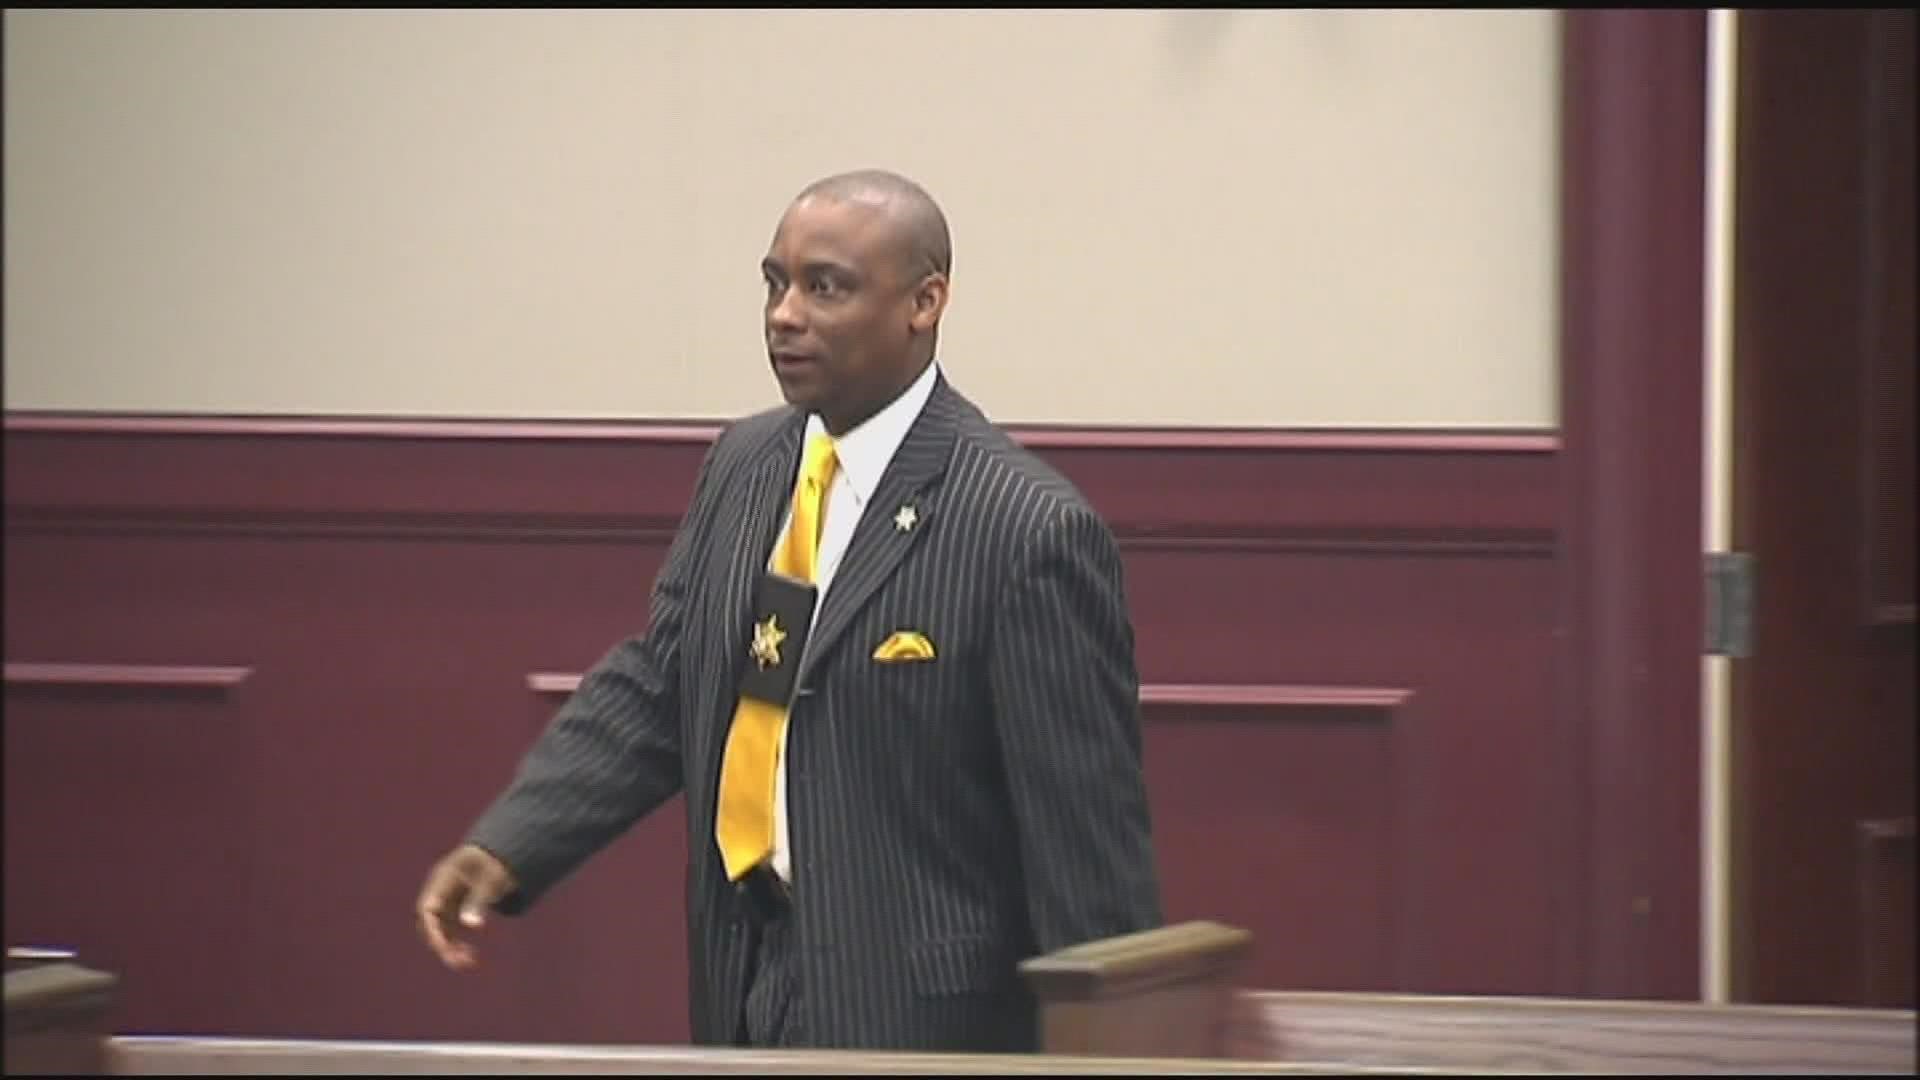 The sentencing for ex-Clayton County Sheriff Victor Hill on his conviction in a federal abuse trial was rescheduled, court records show.